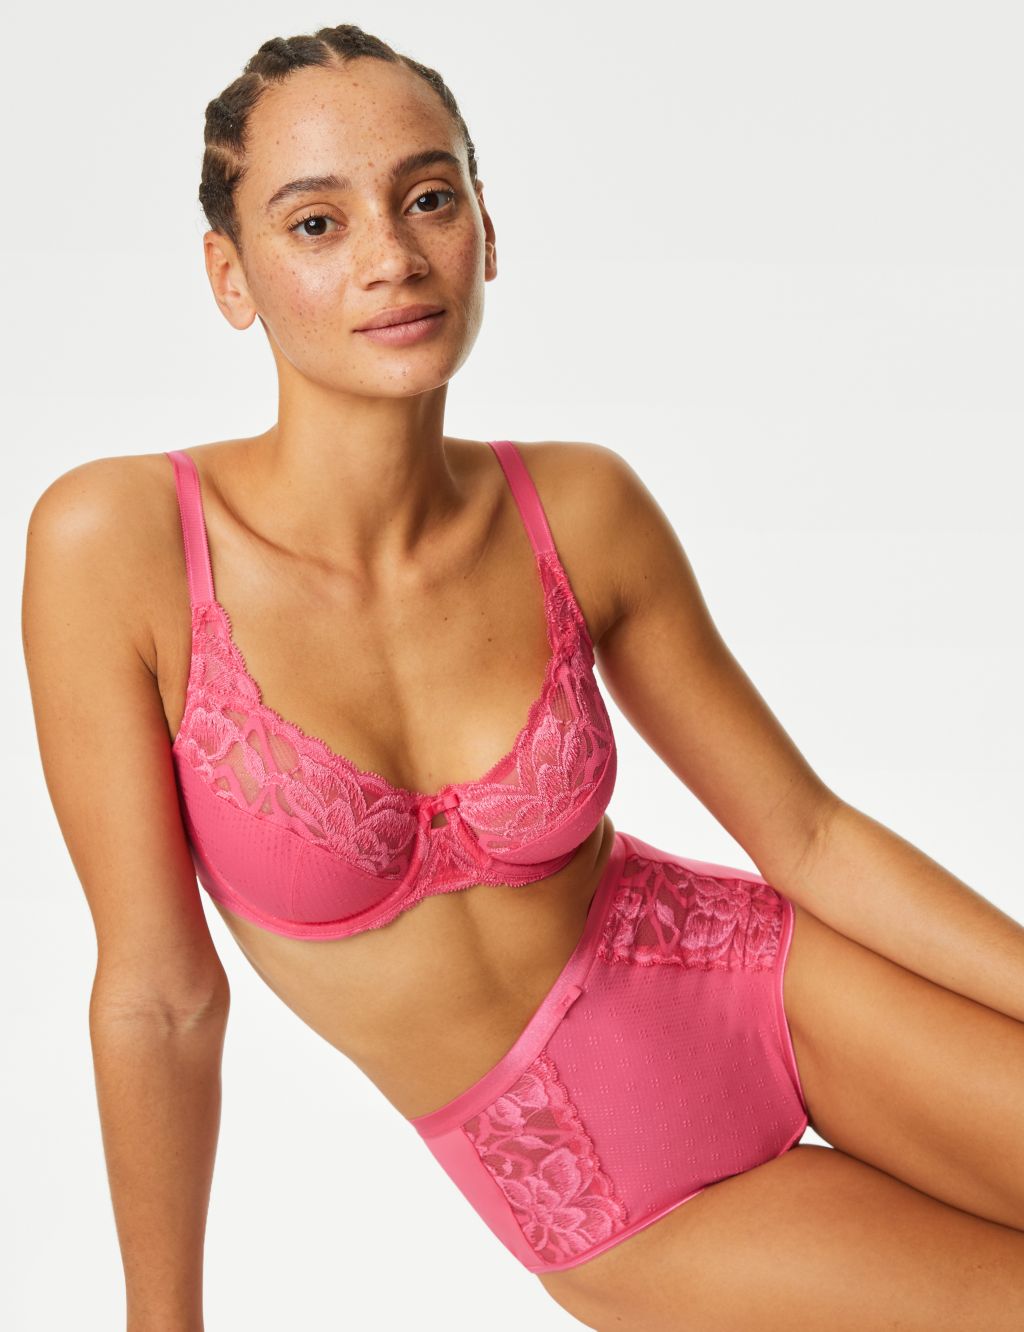 Wildblooms Wired Full Cup Bra Set A-E image 1